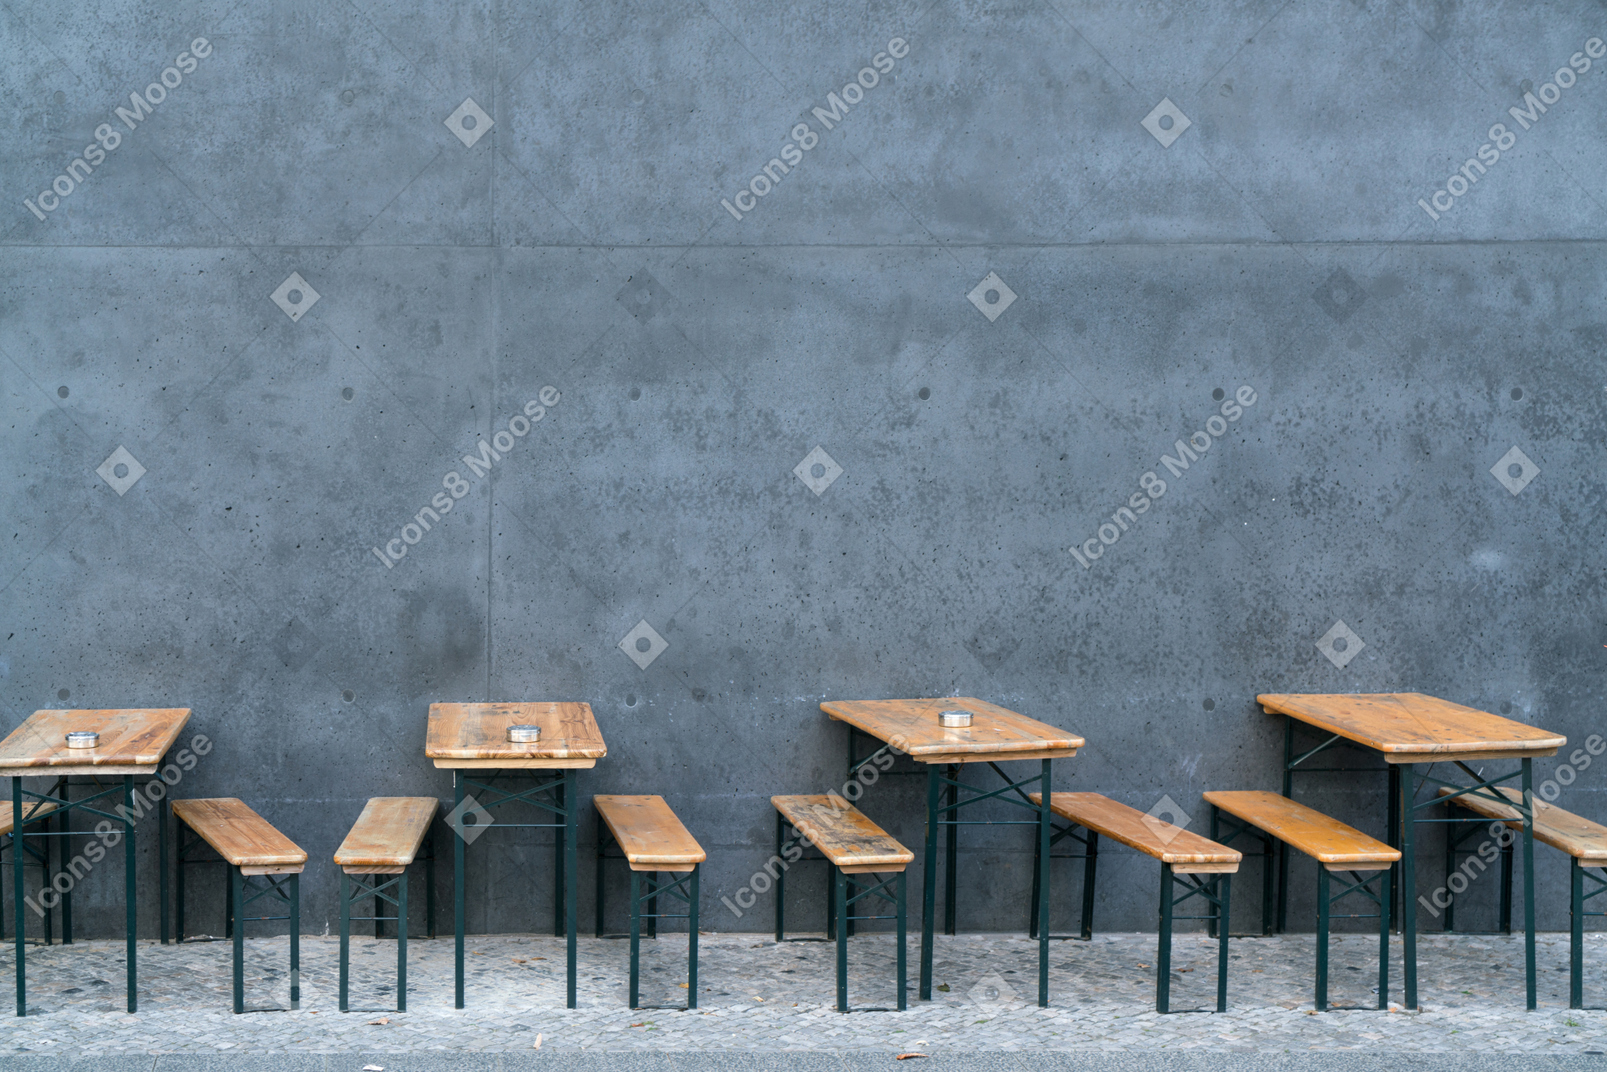 Wooden street cafe tables